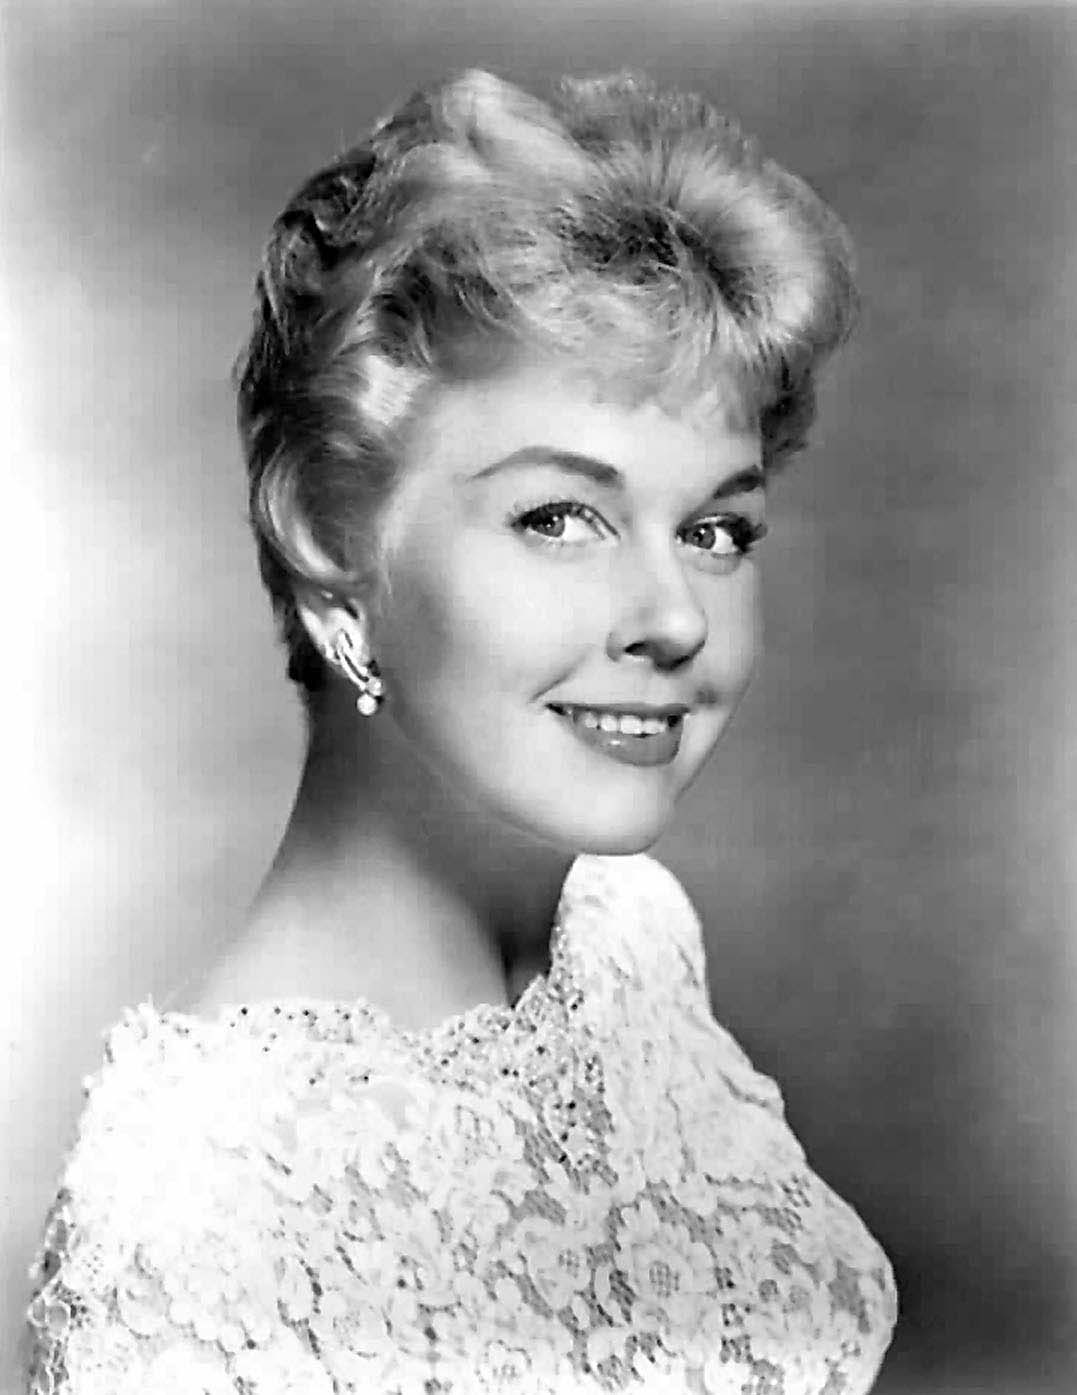 (FILES) This undated file photo shows US actress Doris Day, well known for her romantic/comedy roles in Hollywood films of  the 1950's and early 1960's. - Hollywood icon Doris Day has died at the age of 97, her foundation announced on Monday, May 13, 2019. (Photo by HO / HO / AFP)